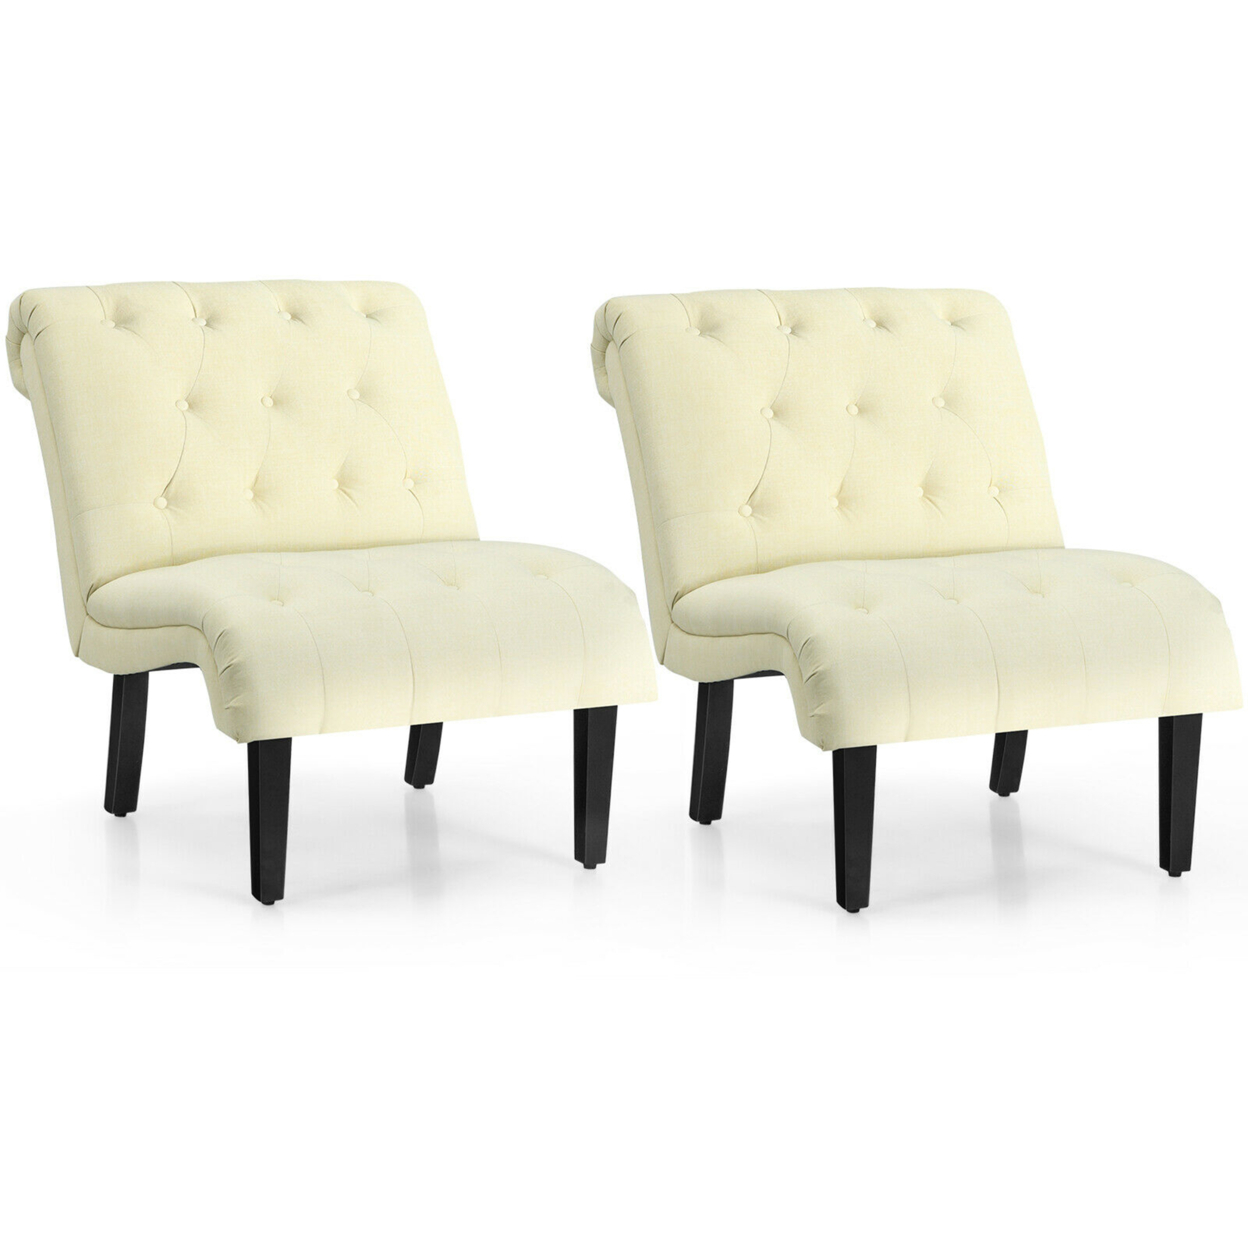 Set Of 2 Armless Accent Chair Upholstered Tufted Lounge Chair - Beige